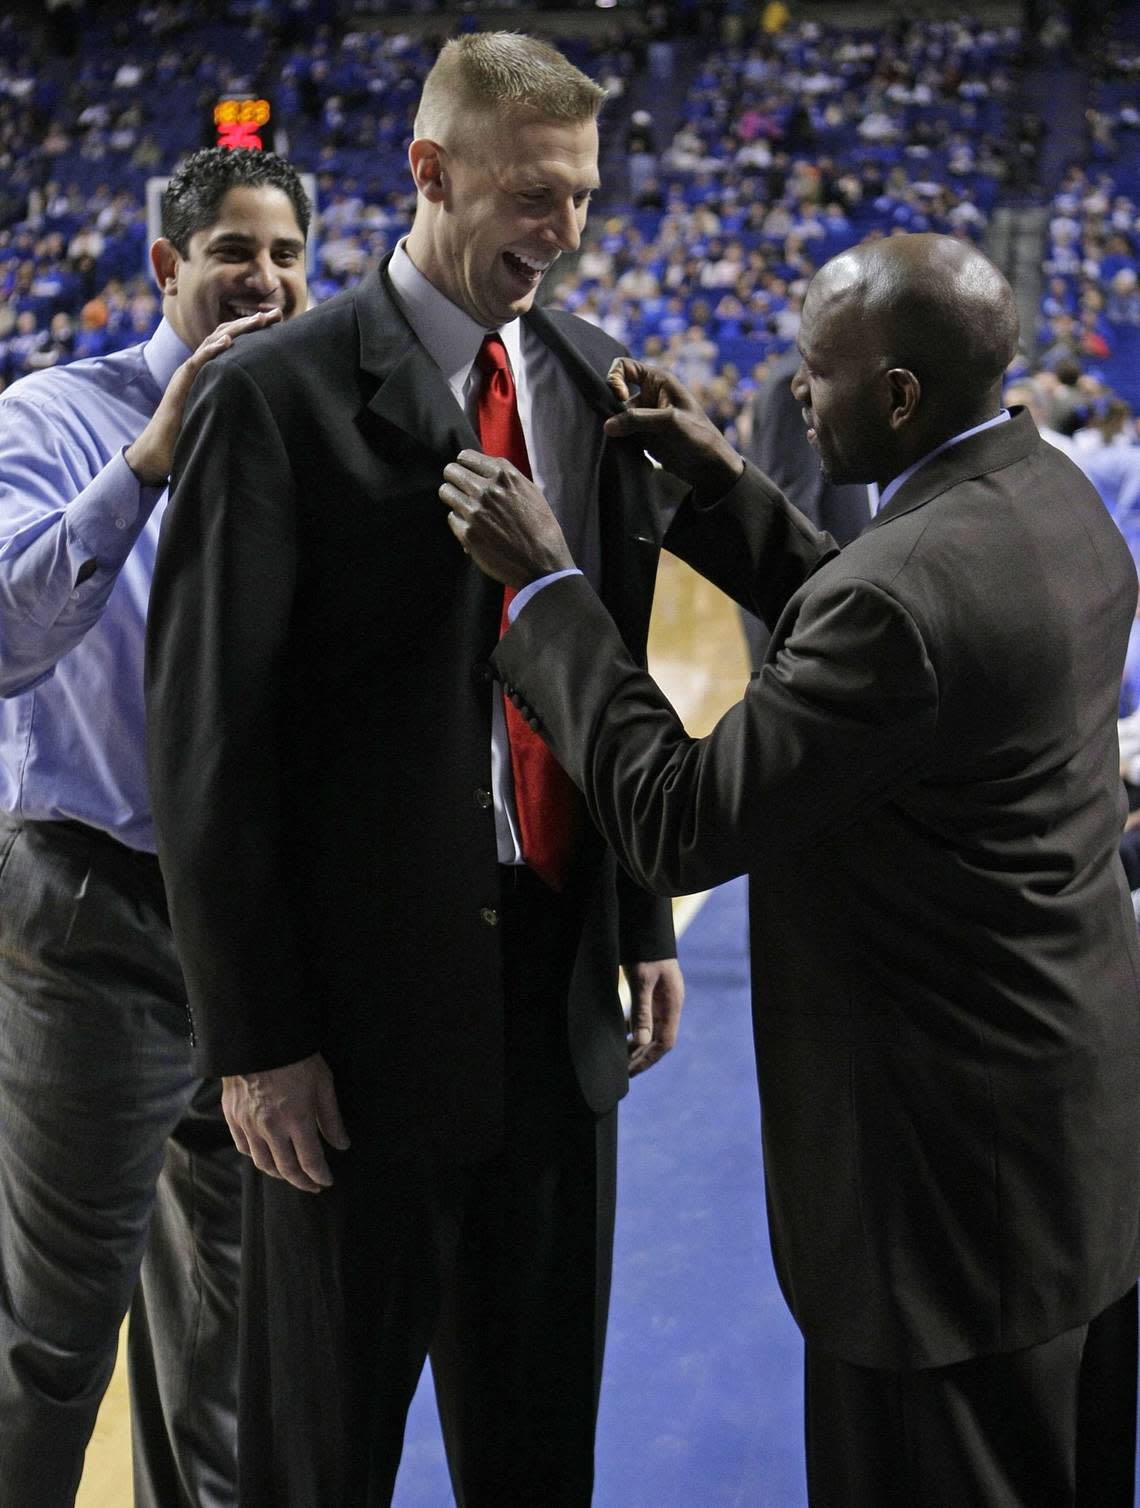 With former Kentucky assistant coach Orlando Antigua looking on, UK’s Tony Delk straightens the jacket of former teammate Mark Pope before the Wildcats played Georgia in Rupp Arena on Jan. 9, 2010.